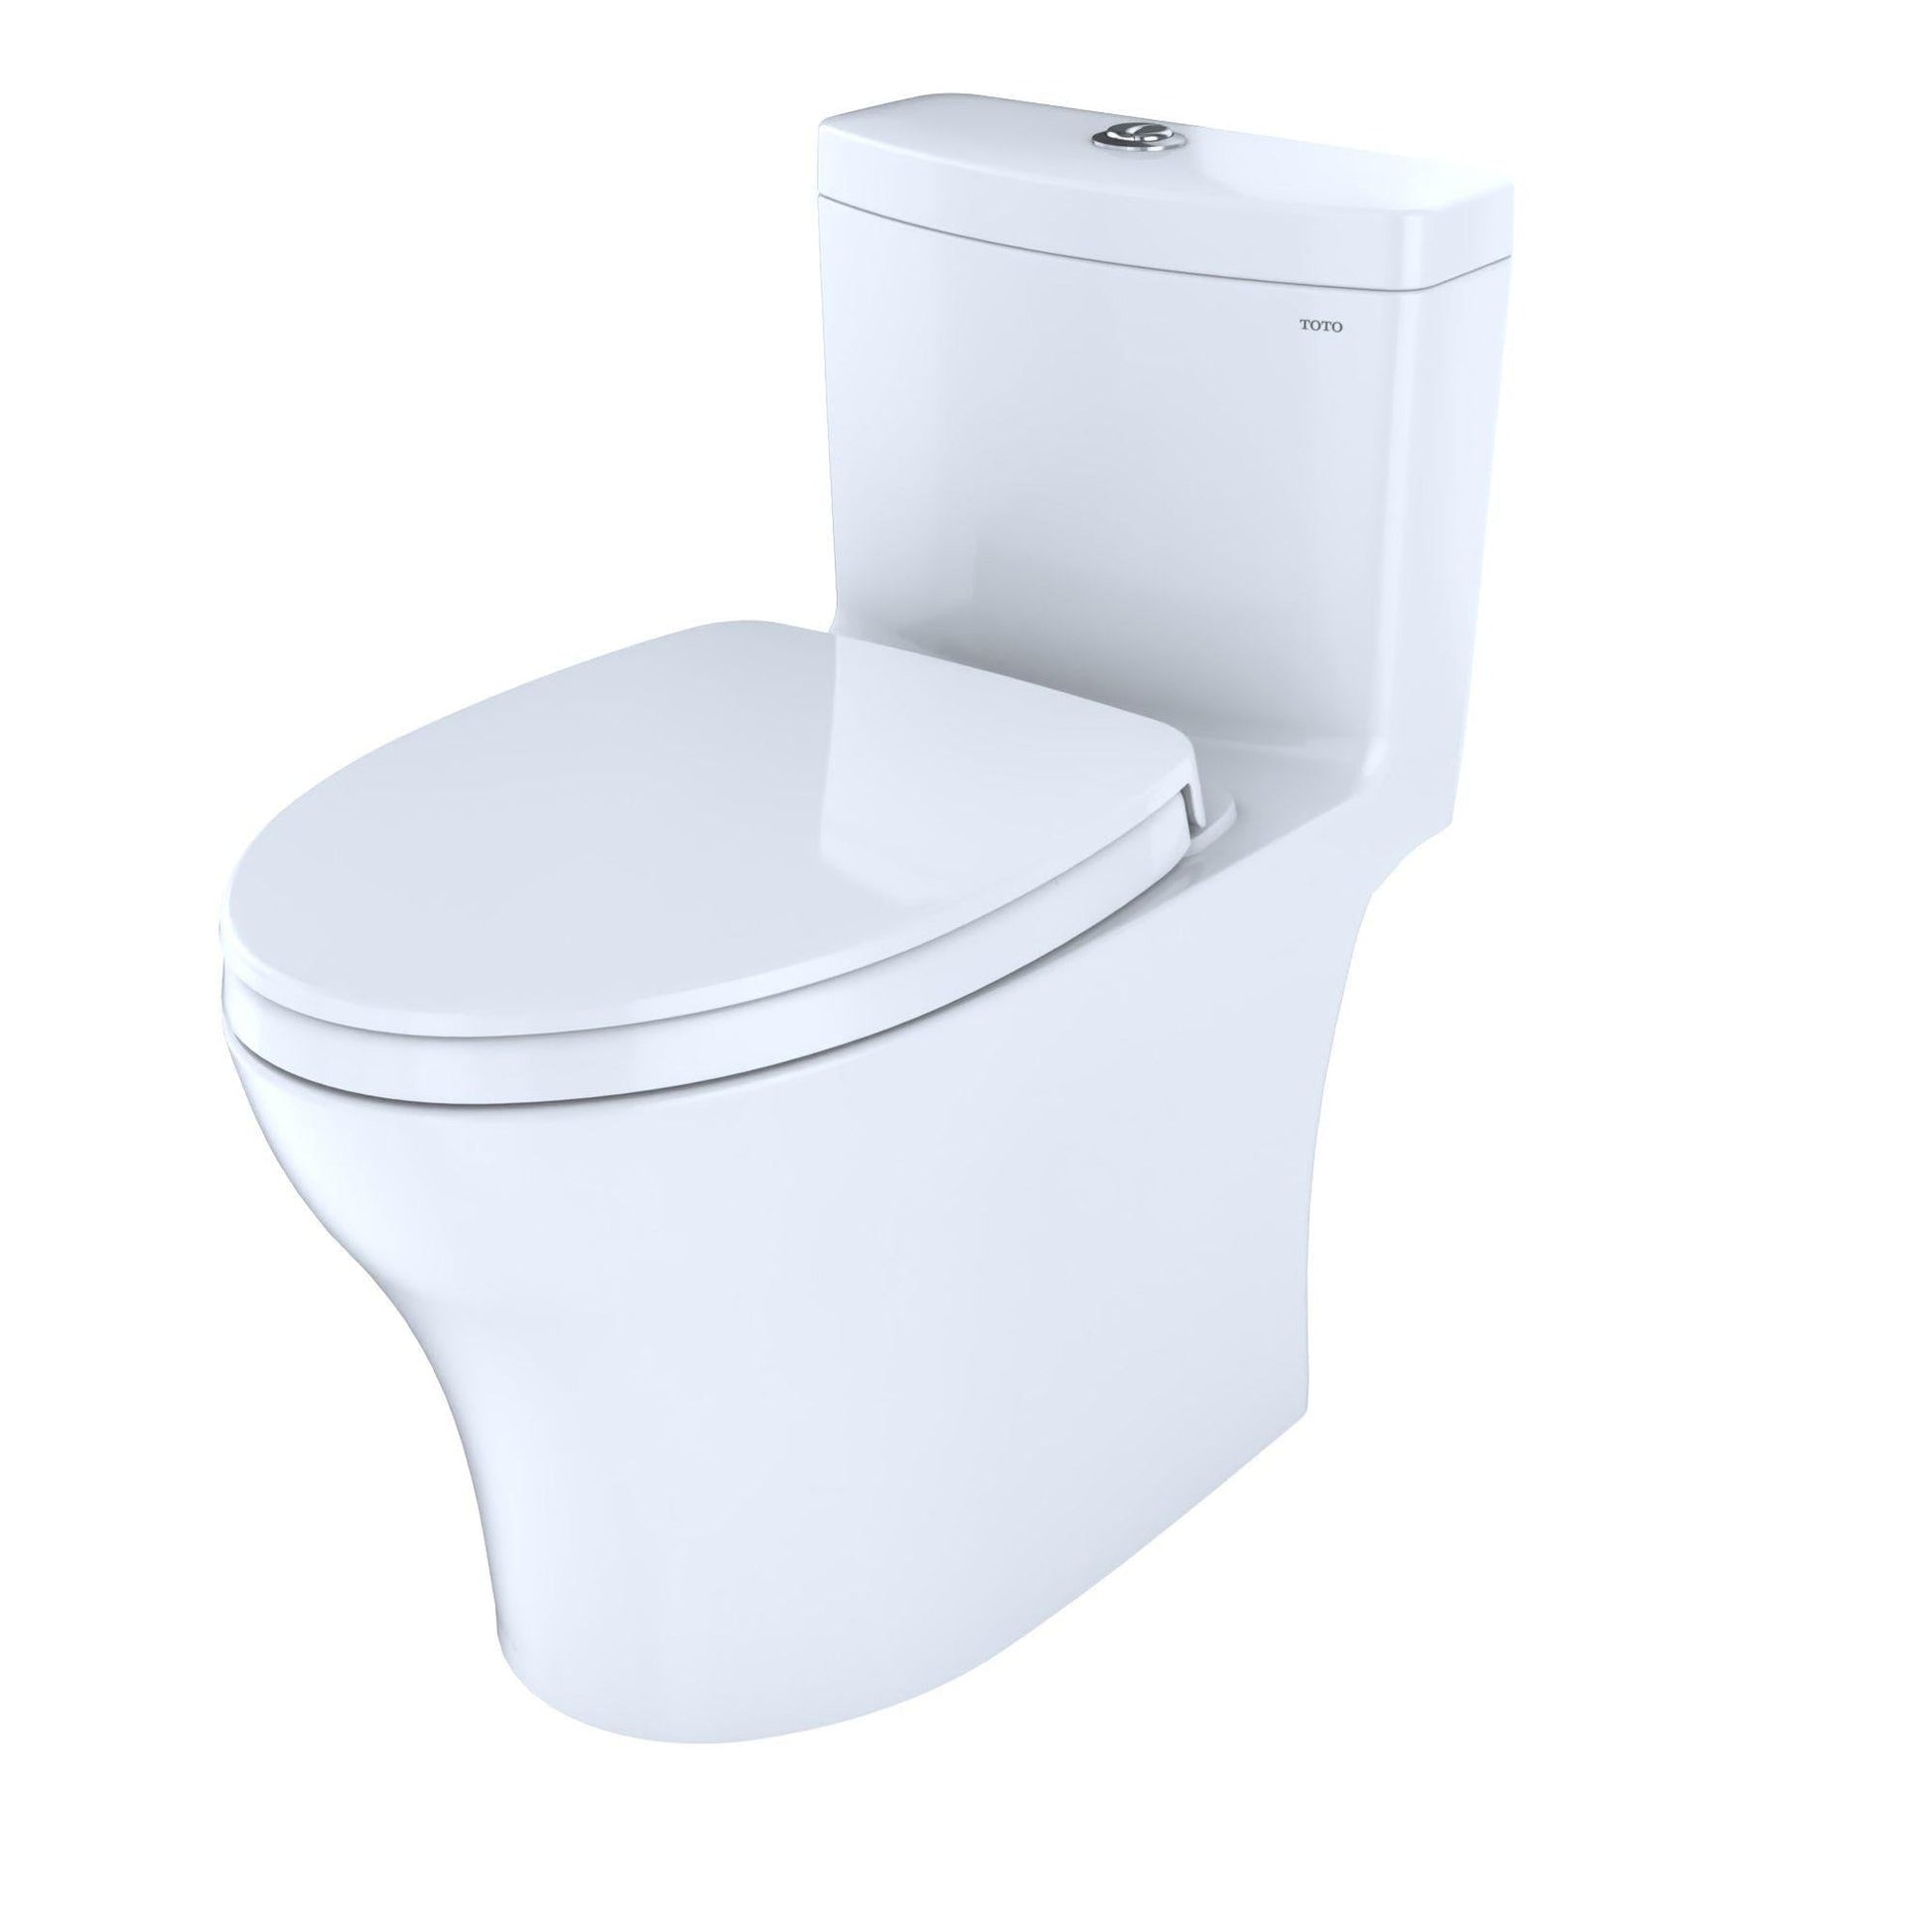 TOTO Aquia IV Cotton White One-Piece 0.8 GPF & 1.28 GPF Dual-Flush Elongated Toilet With WASHLET+ Connection - Seat Included